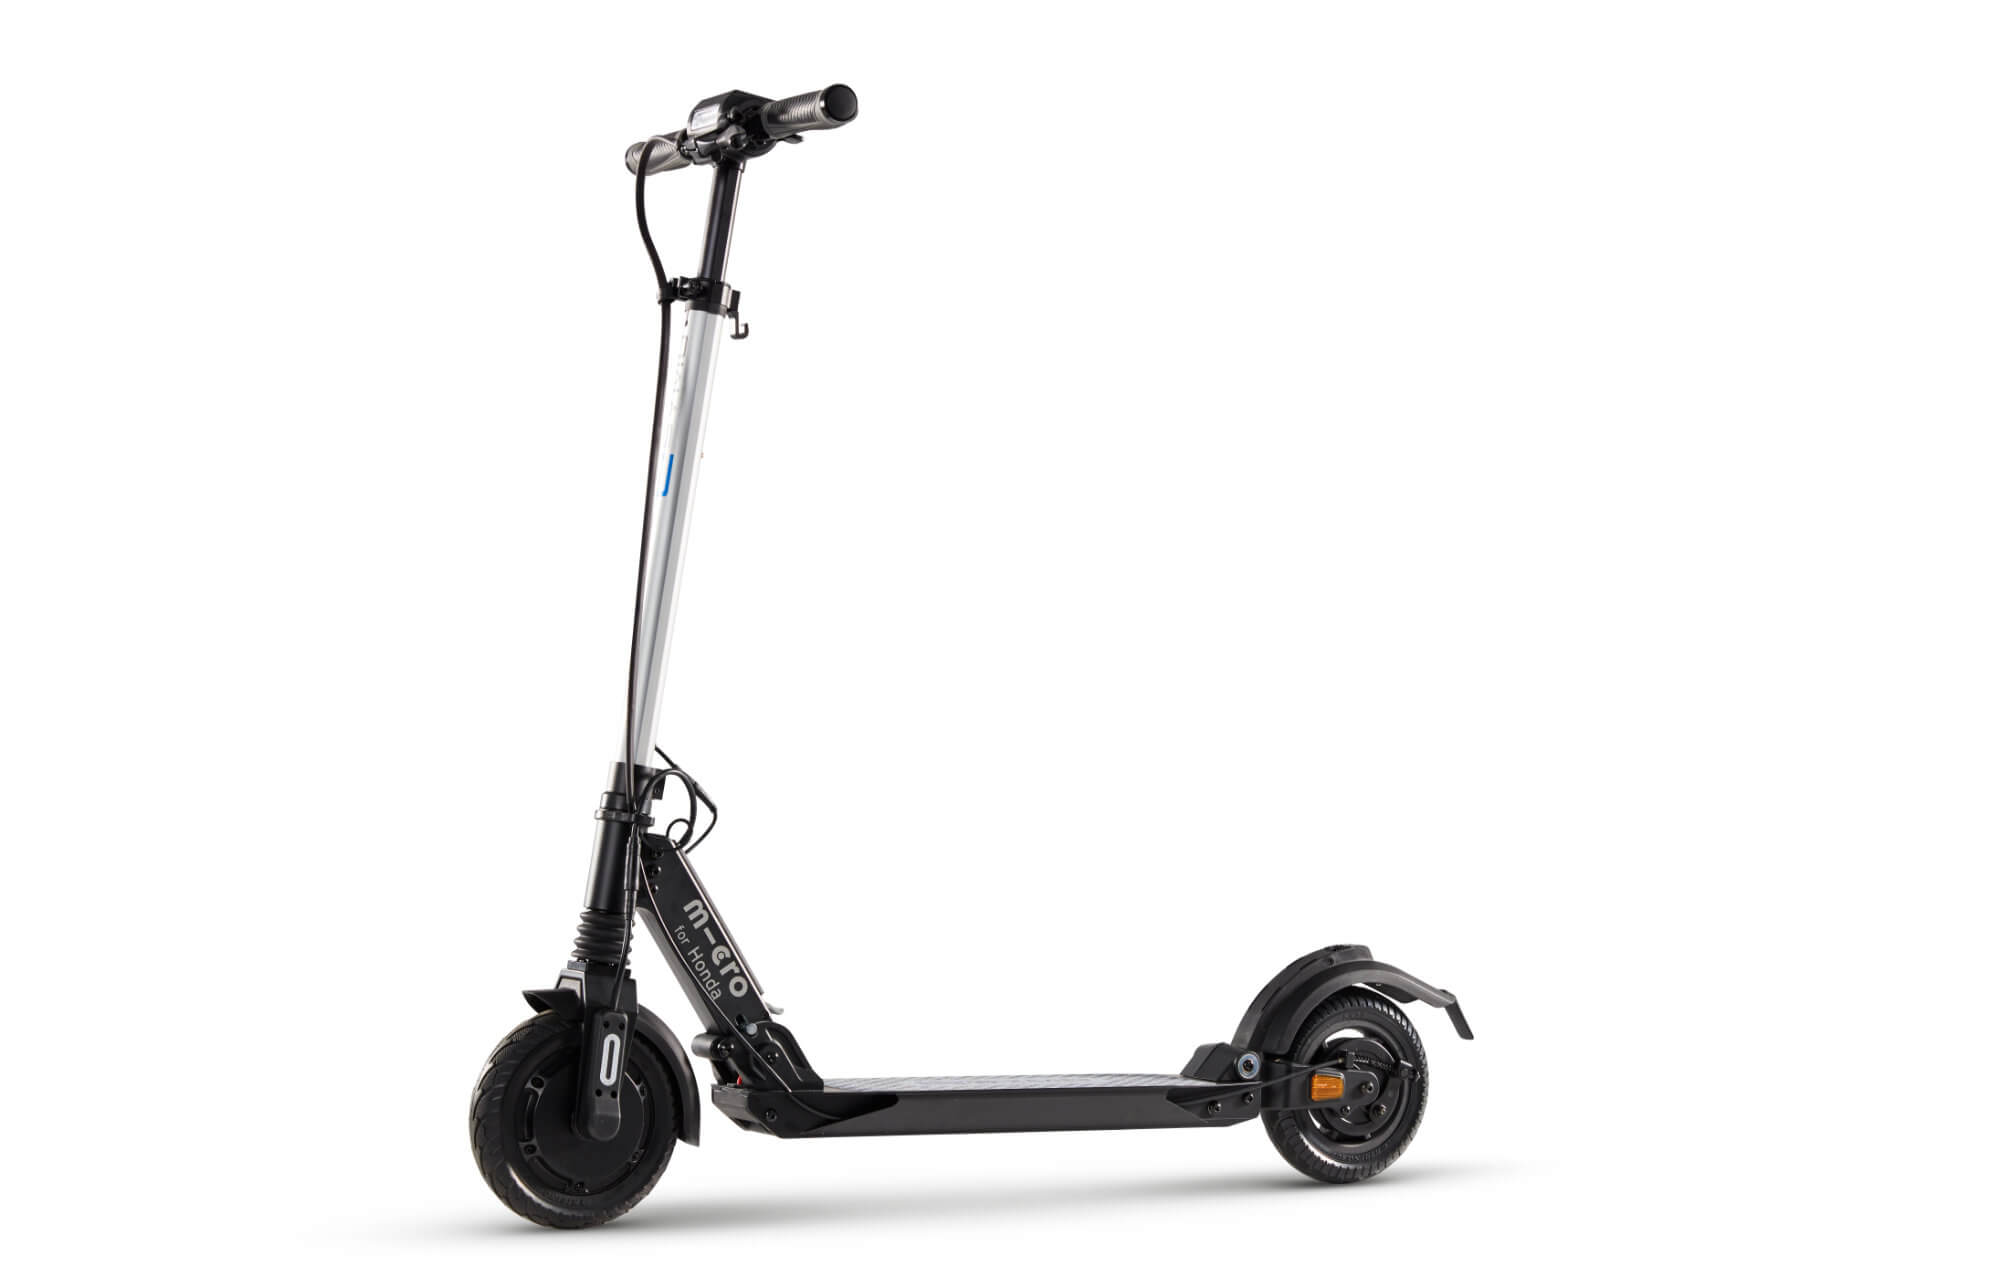 All-New Honda eSYMO Scooter features - big wheels